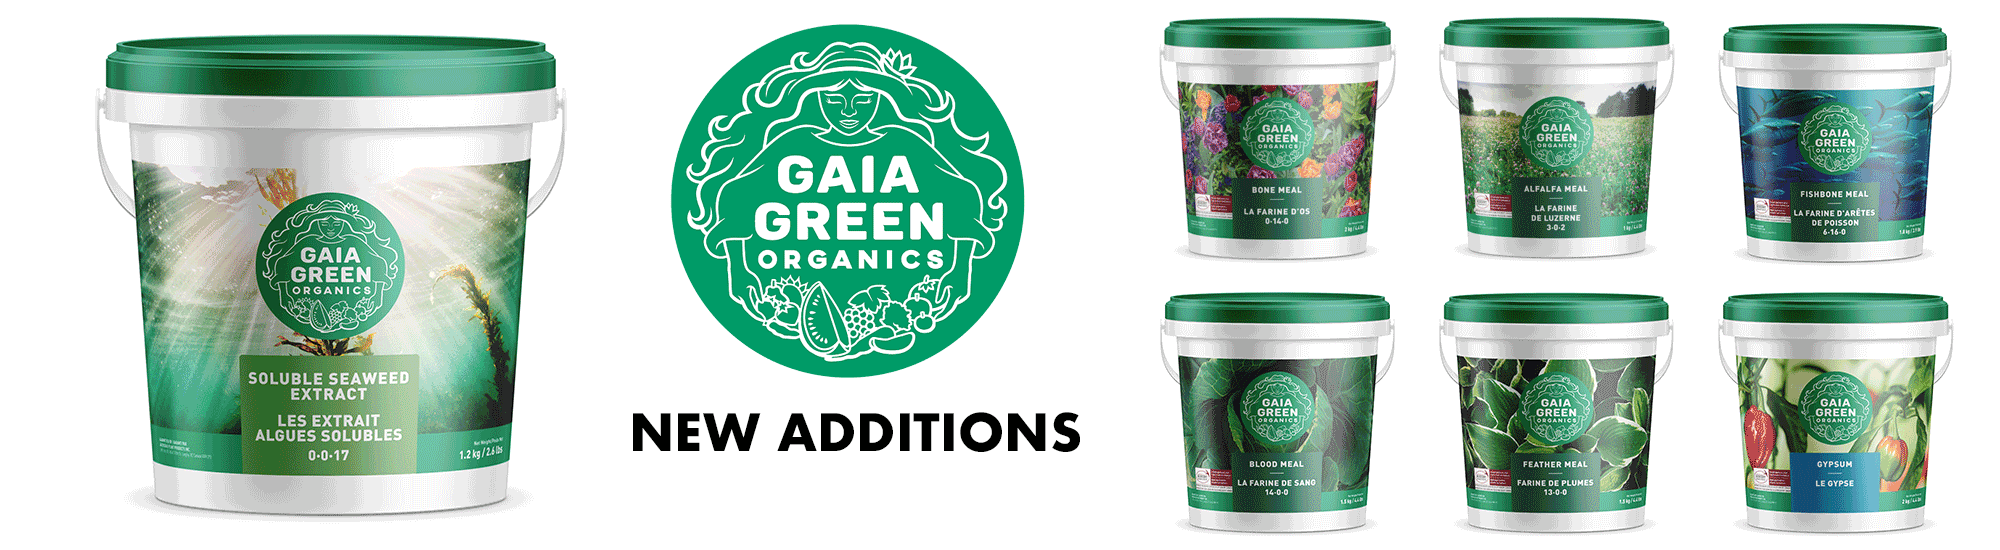 gaia-green-new_products_eng